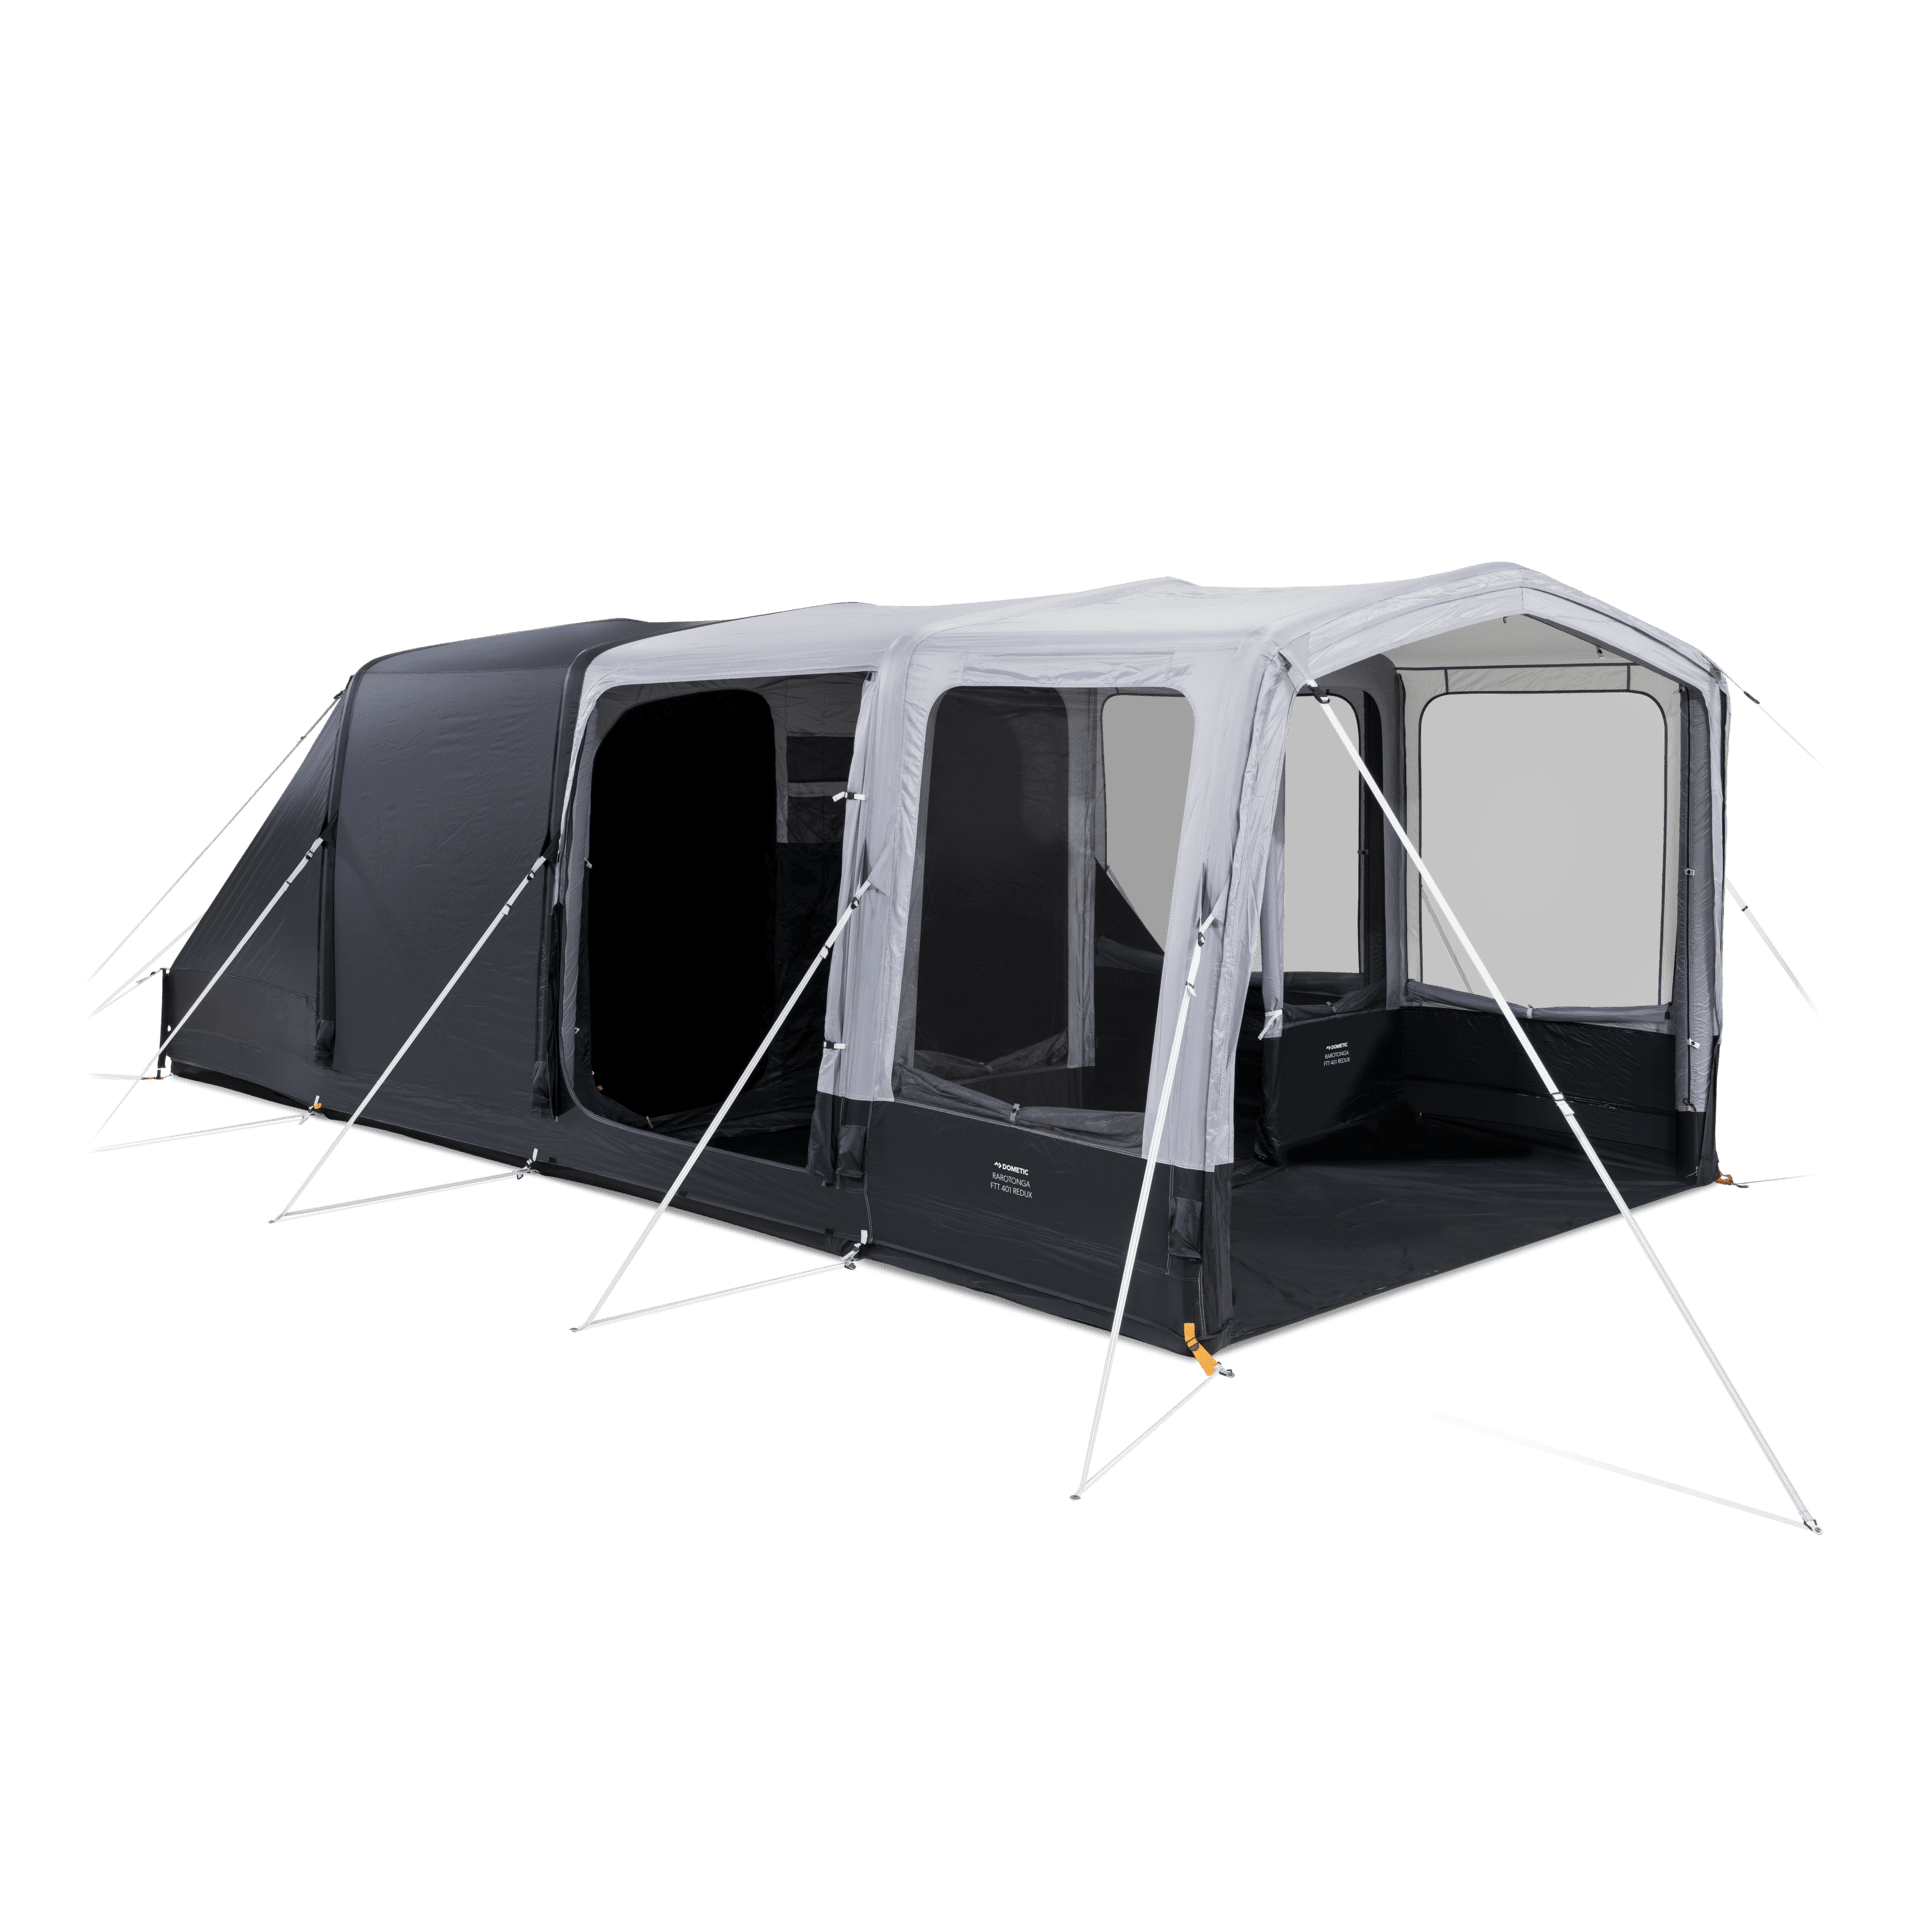 Large Family Tents for Comfort, Dometic UK